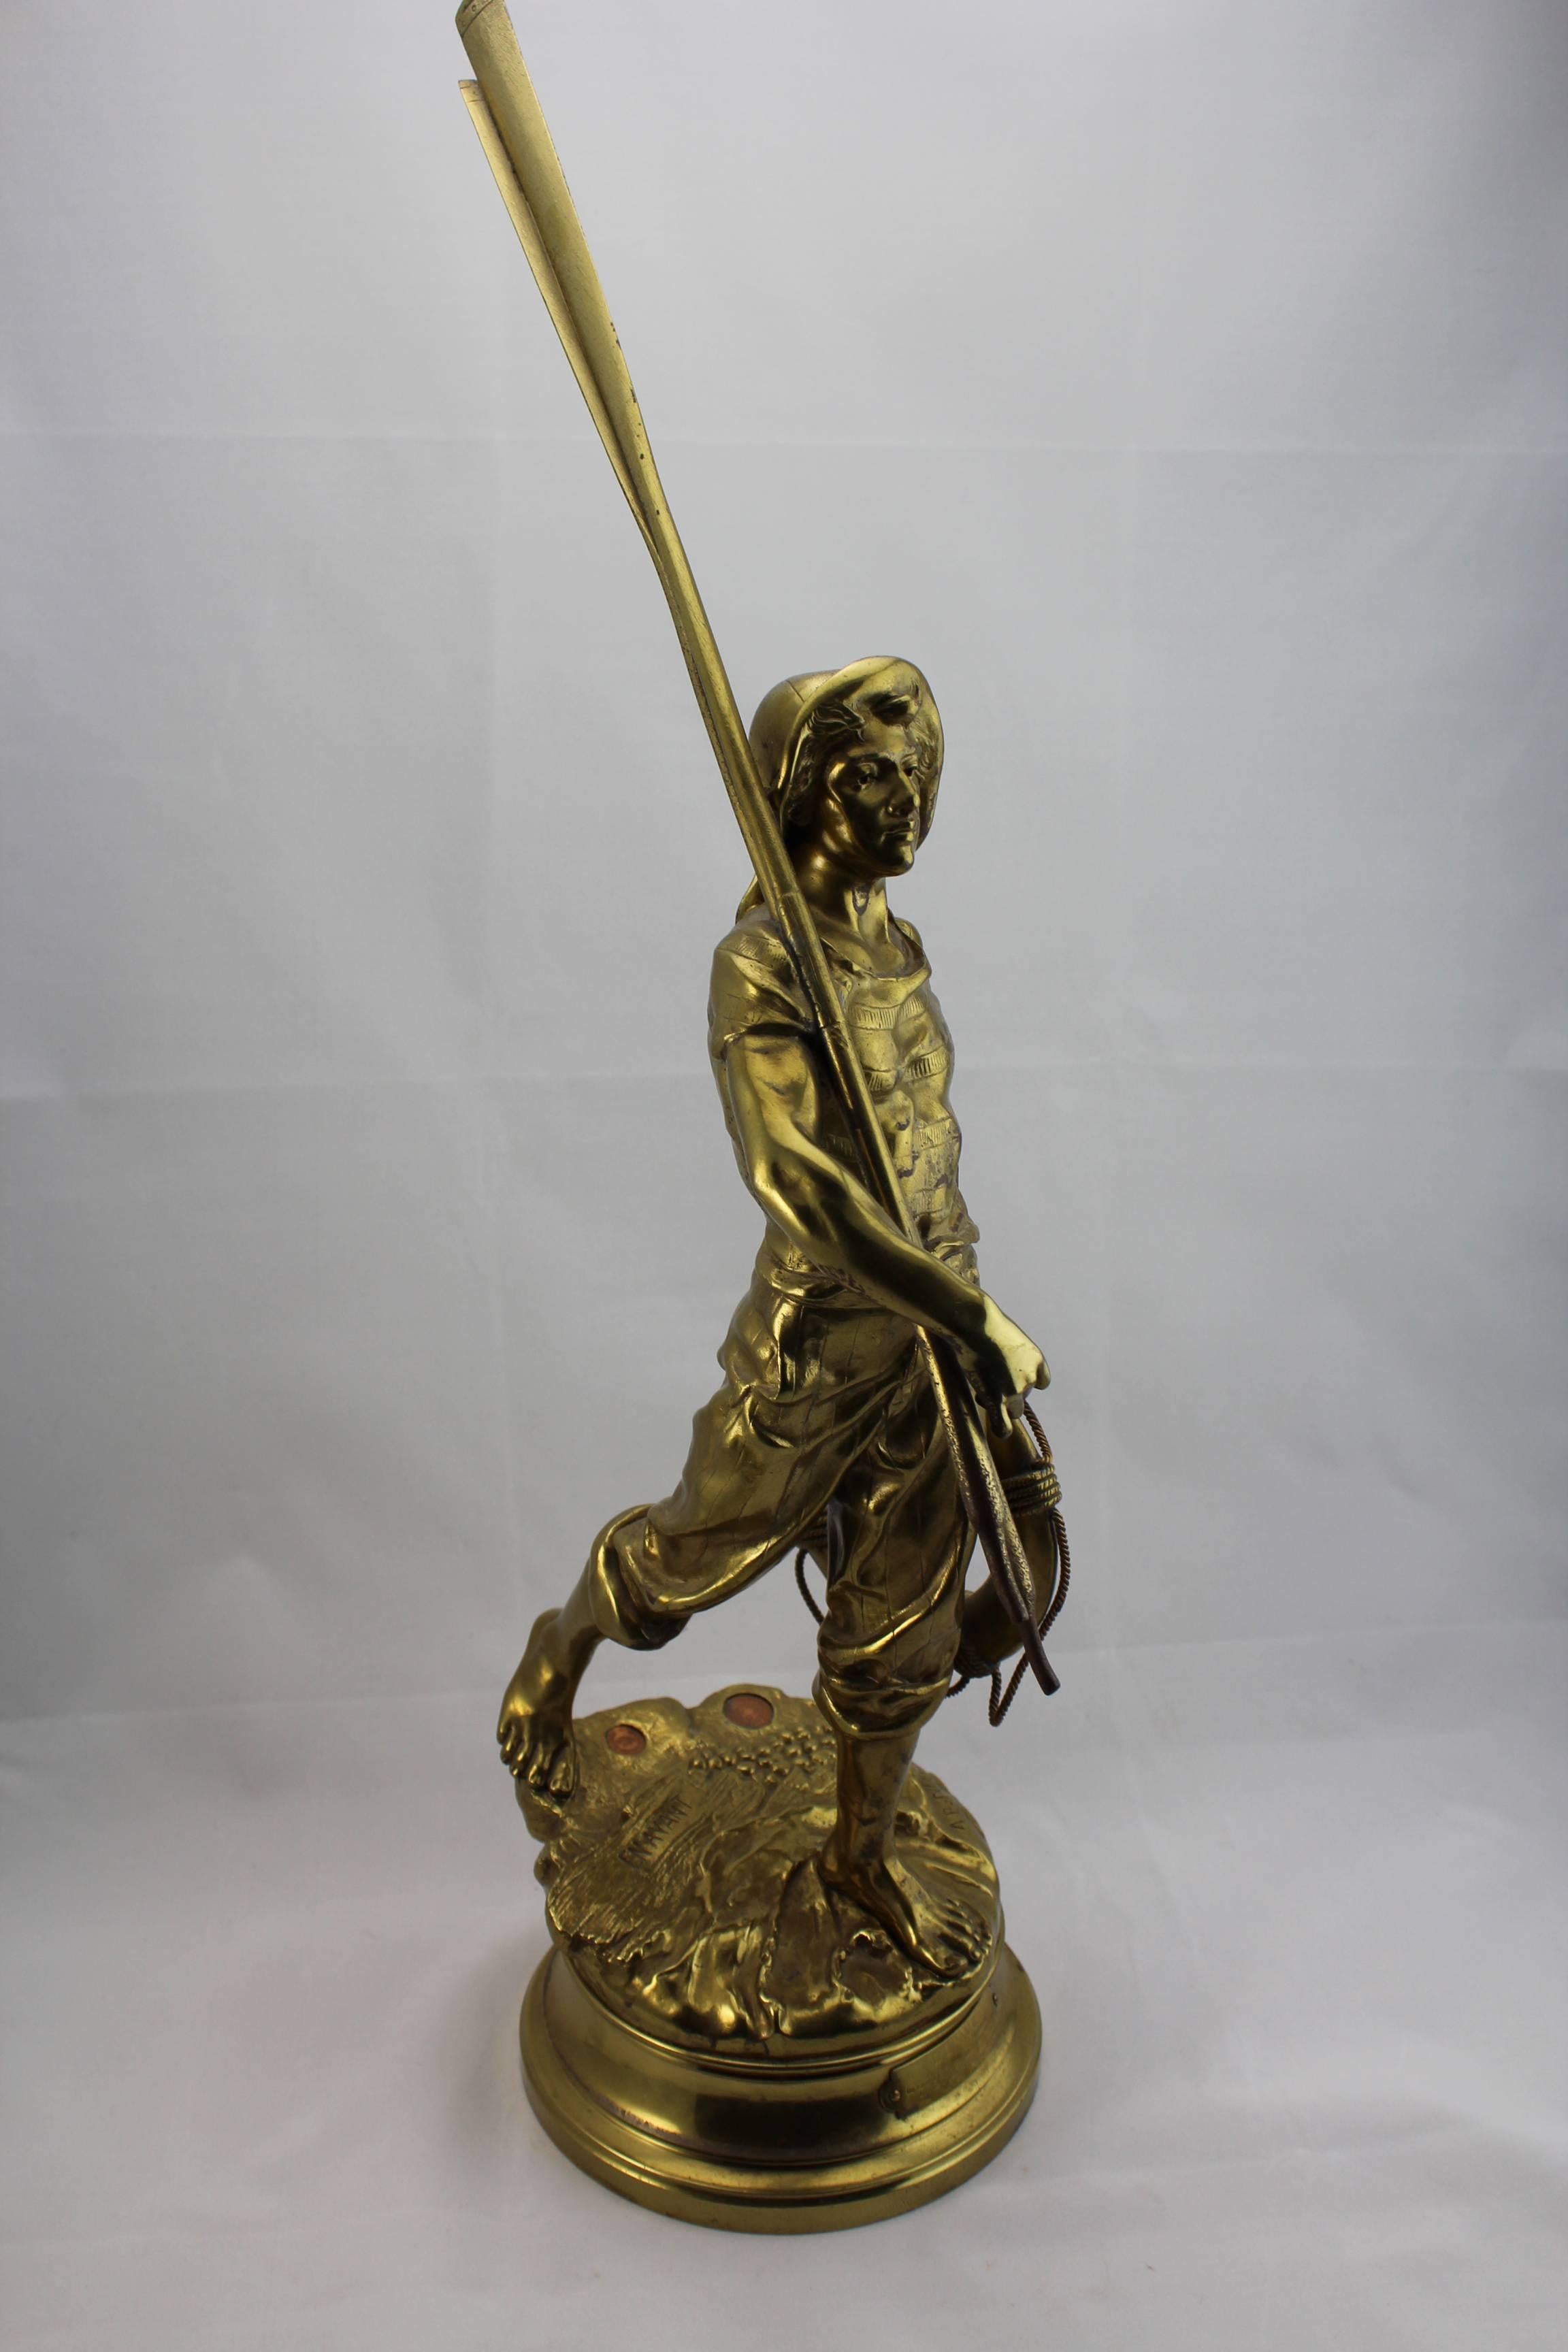 This larger than life gold gilded bronze of a sea man with oars will decorate any area and be a great conversation piece. The composition and casting detail are amazing. This is the largest of these models standing at 25 inches. 
En Avant